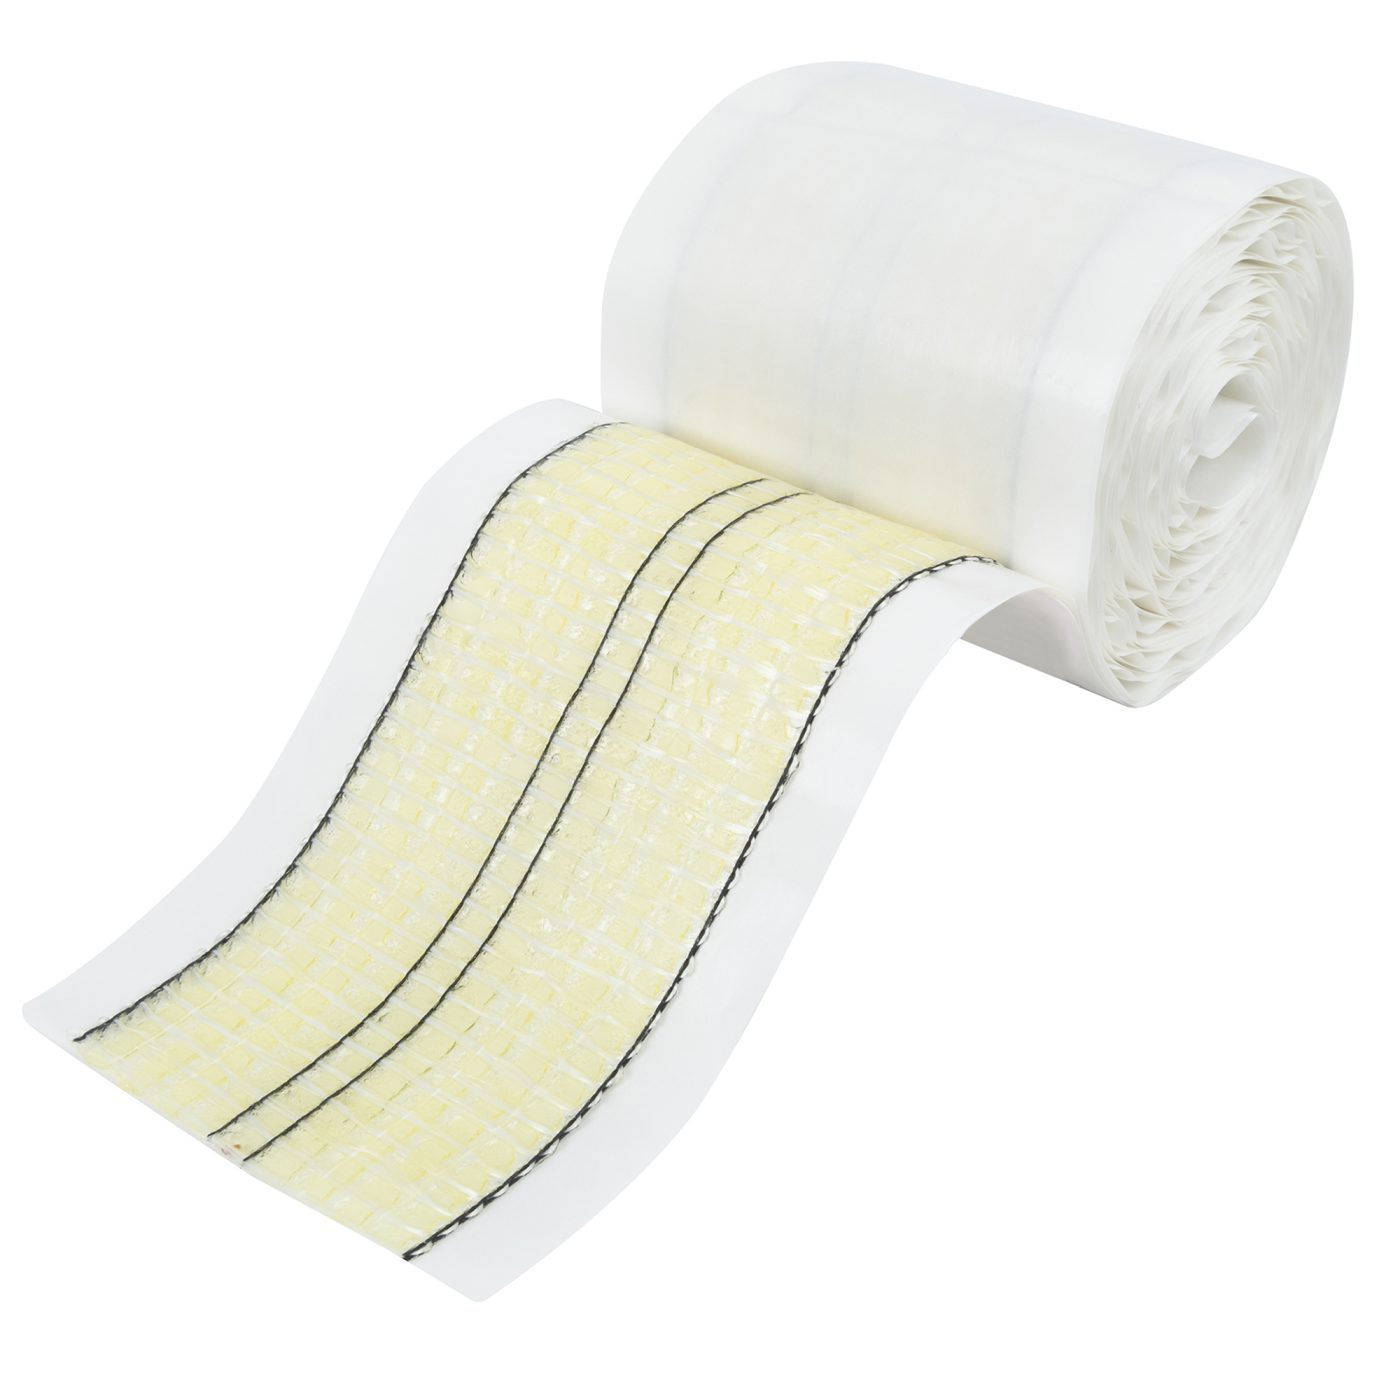  ECHOtape DC-W188F Double Sided Removable Carpet Tape